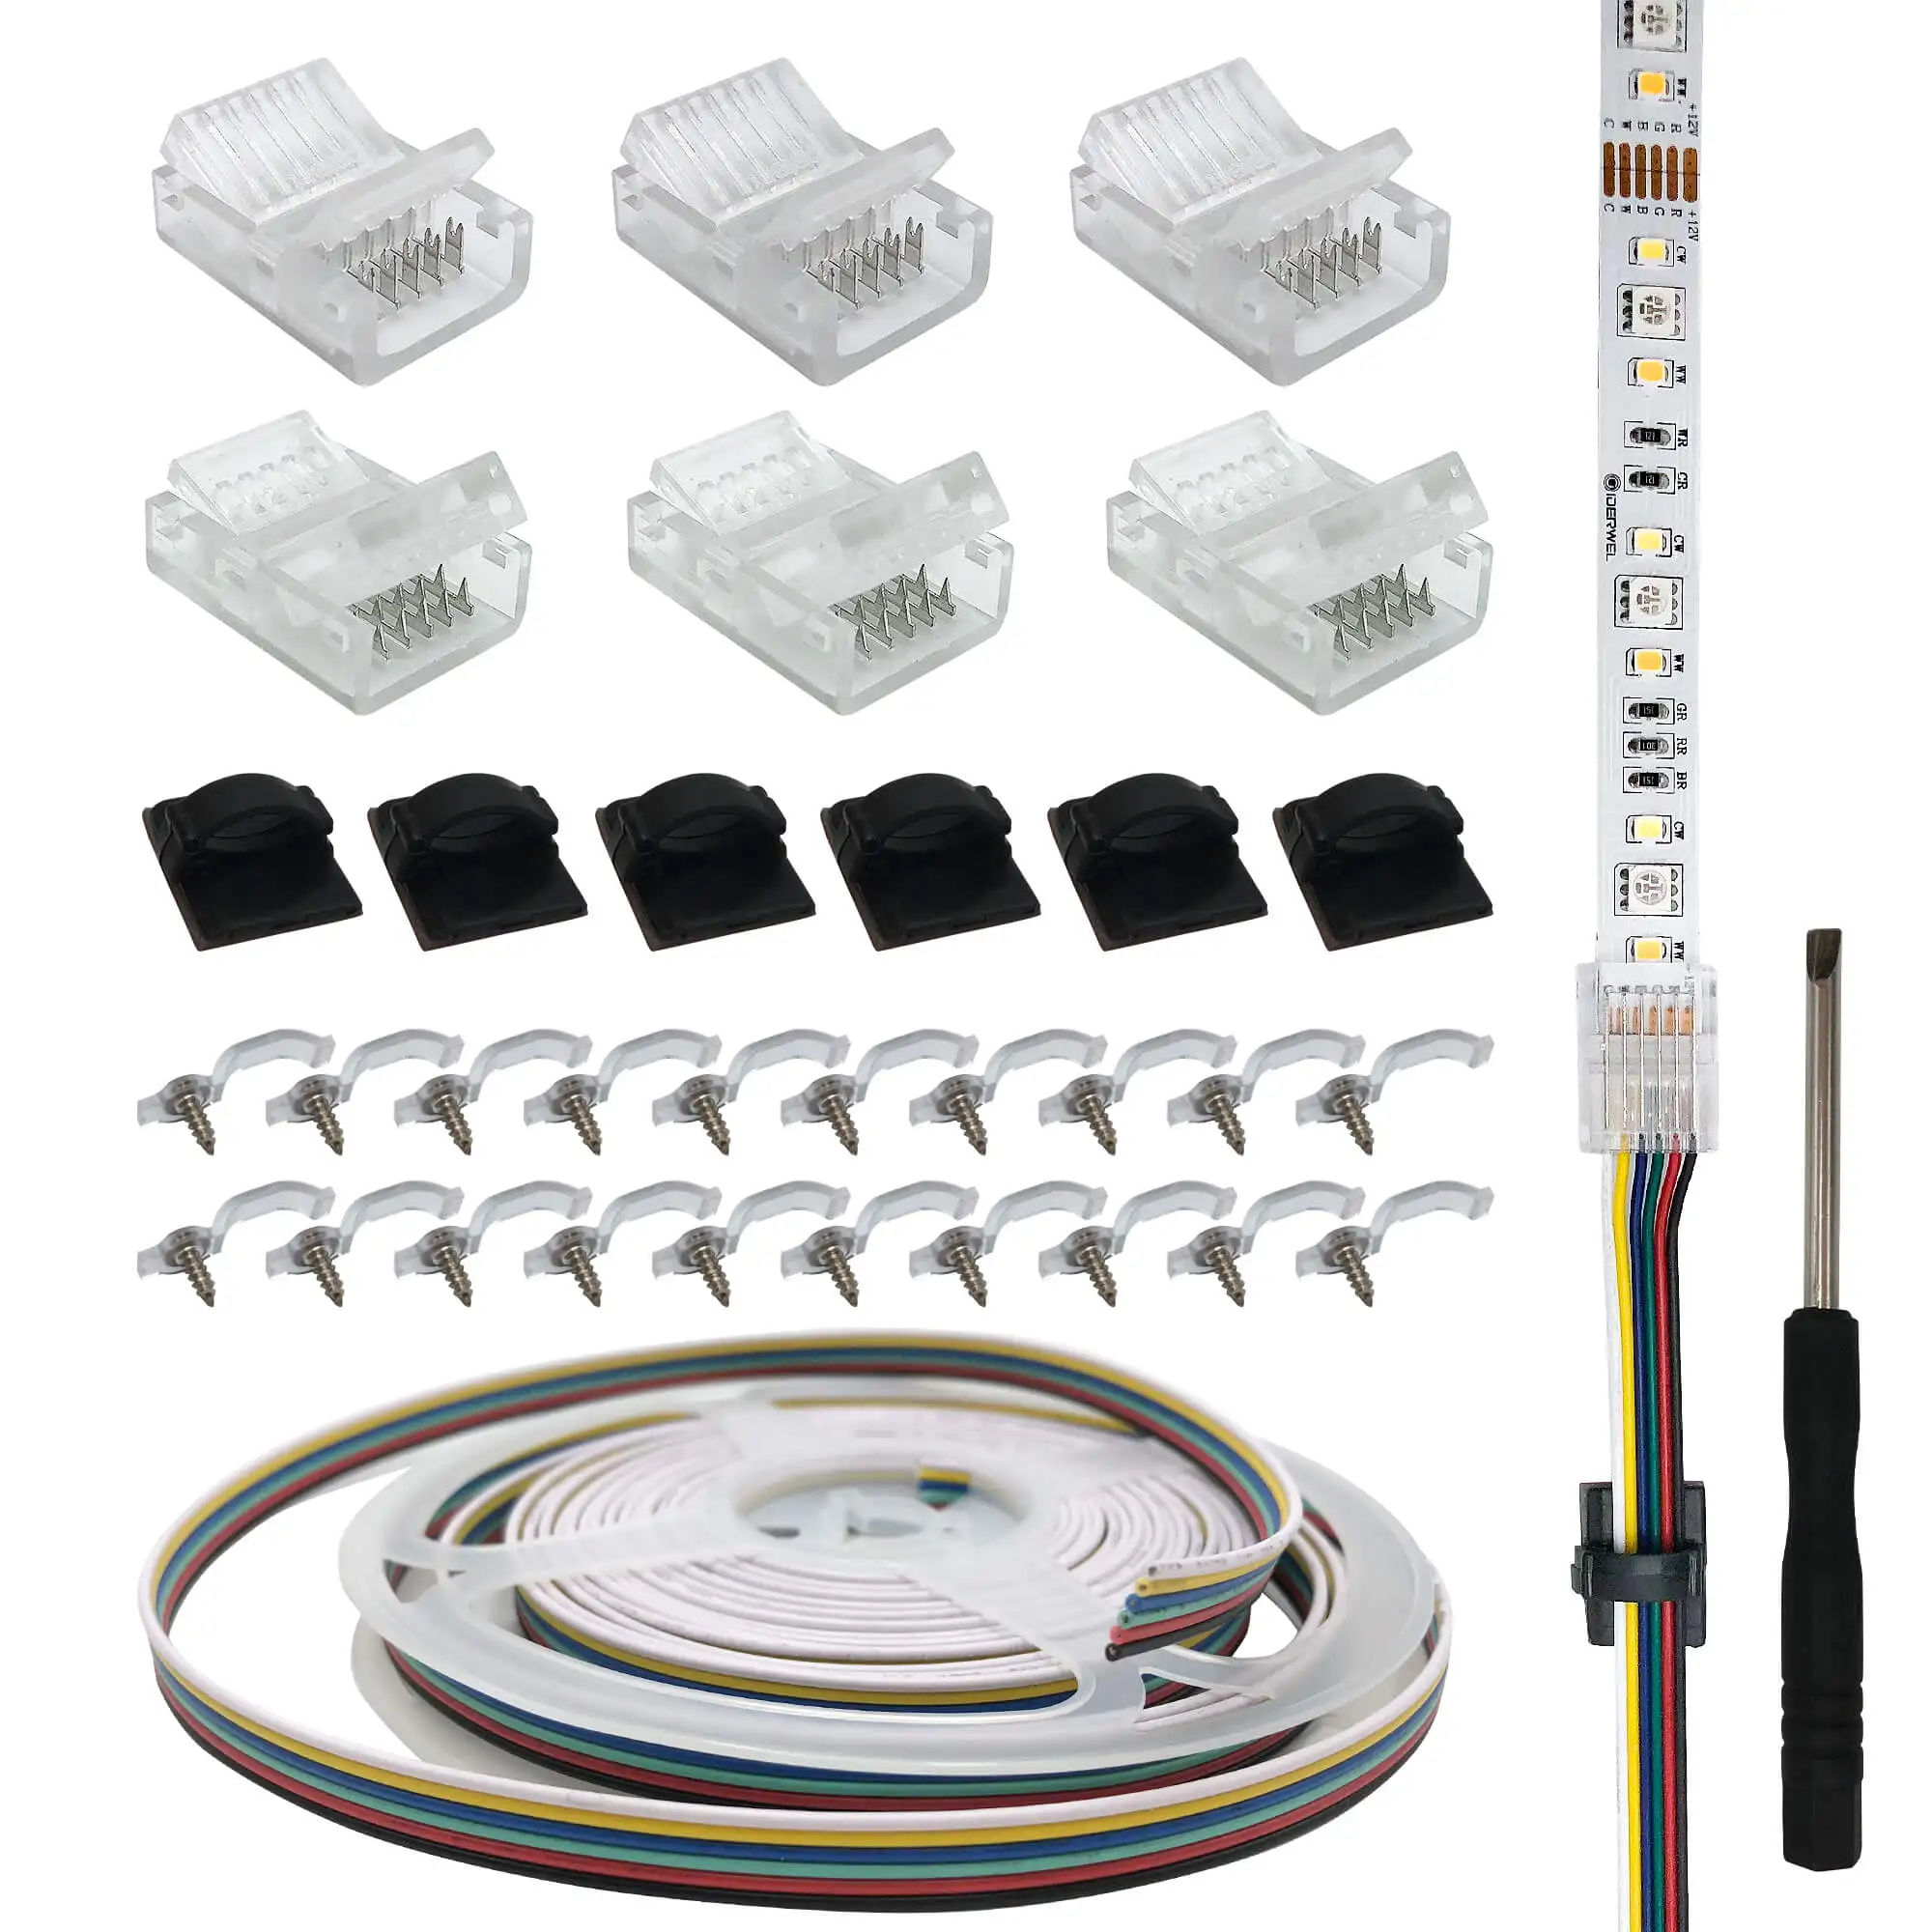 RGBCCT 6 Pin LED Strip Connectors with Extension Cable 6 Pack 12mm LED Strip RGBCW to Wire Solderless Transparent Track Lighting